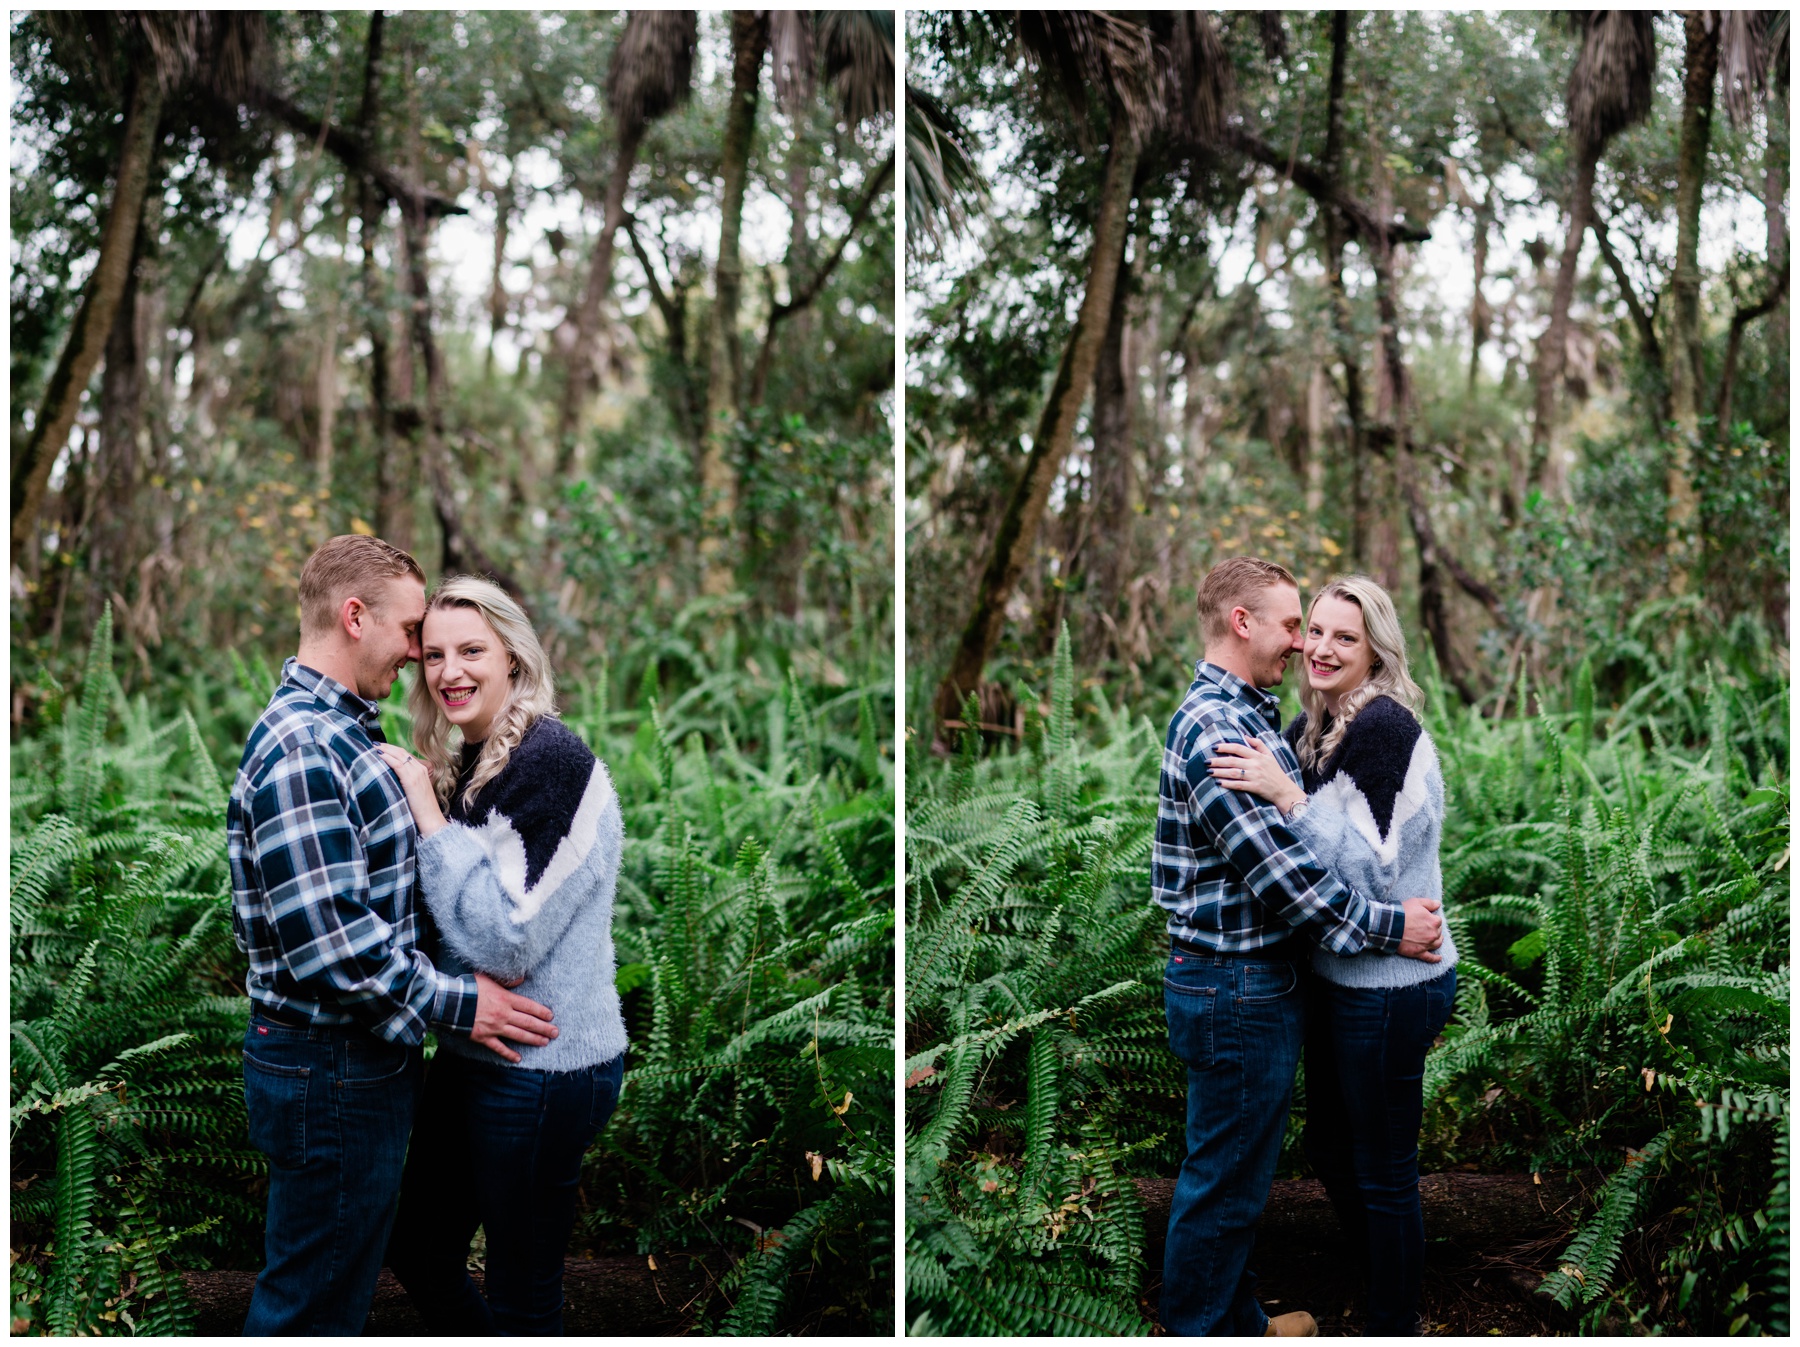 Couple embraces in swamp setting during Caloosahatchee River photo shoot.